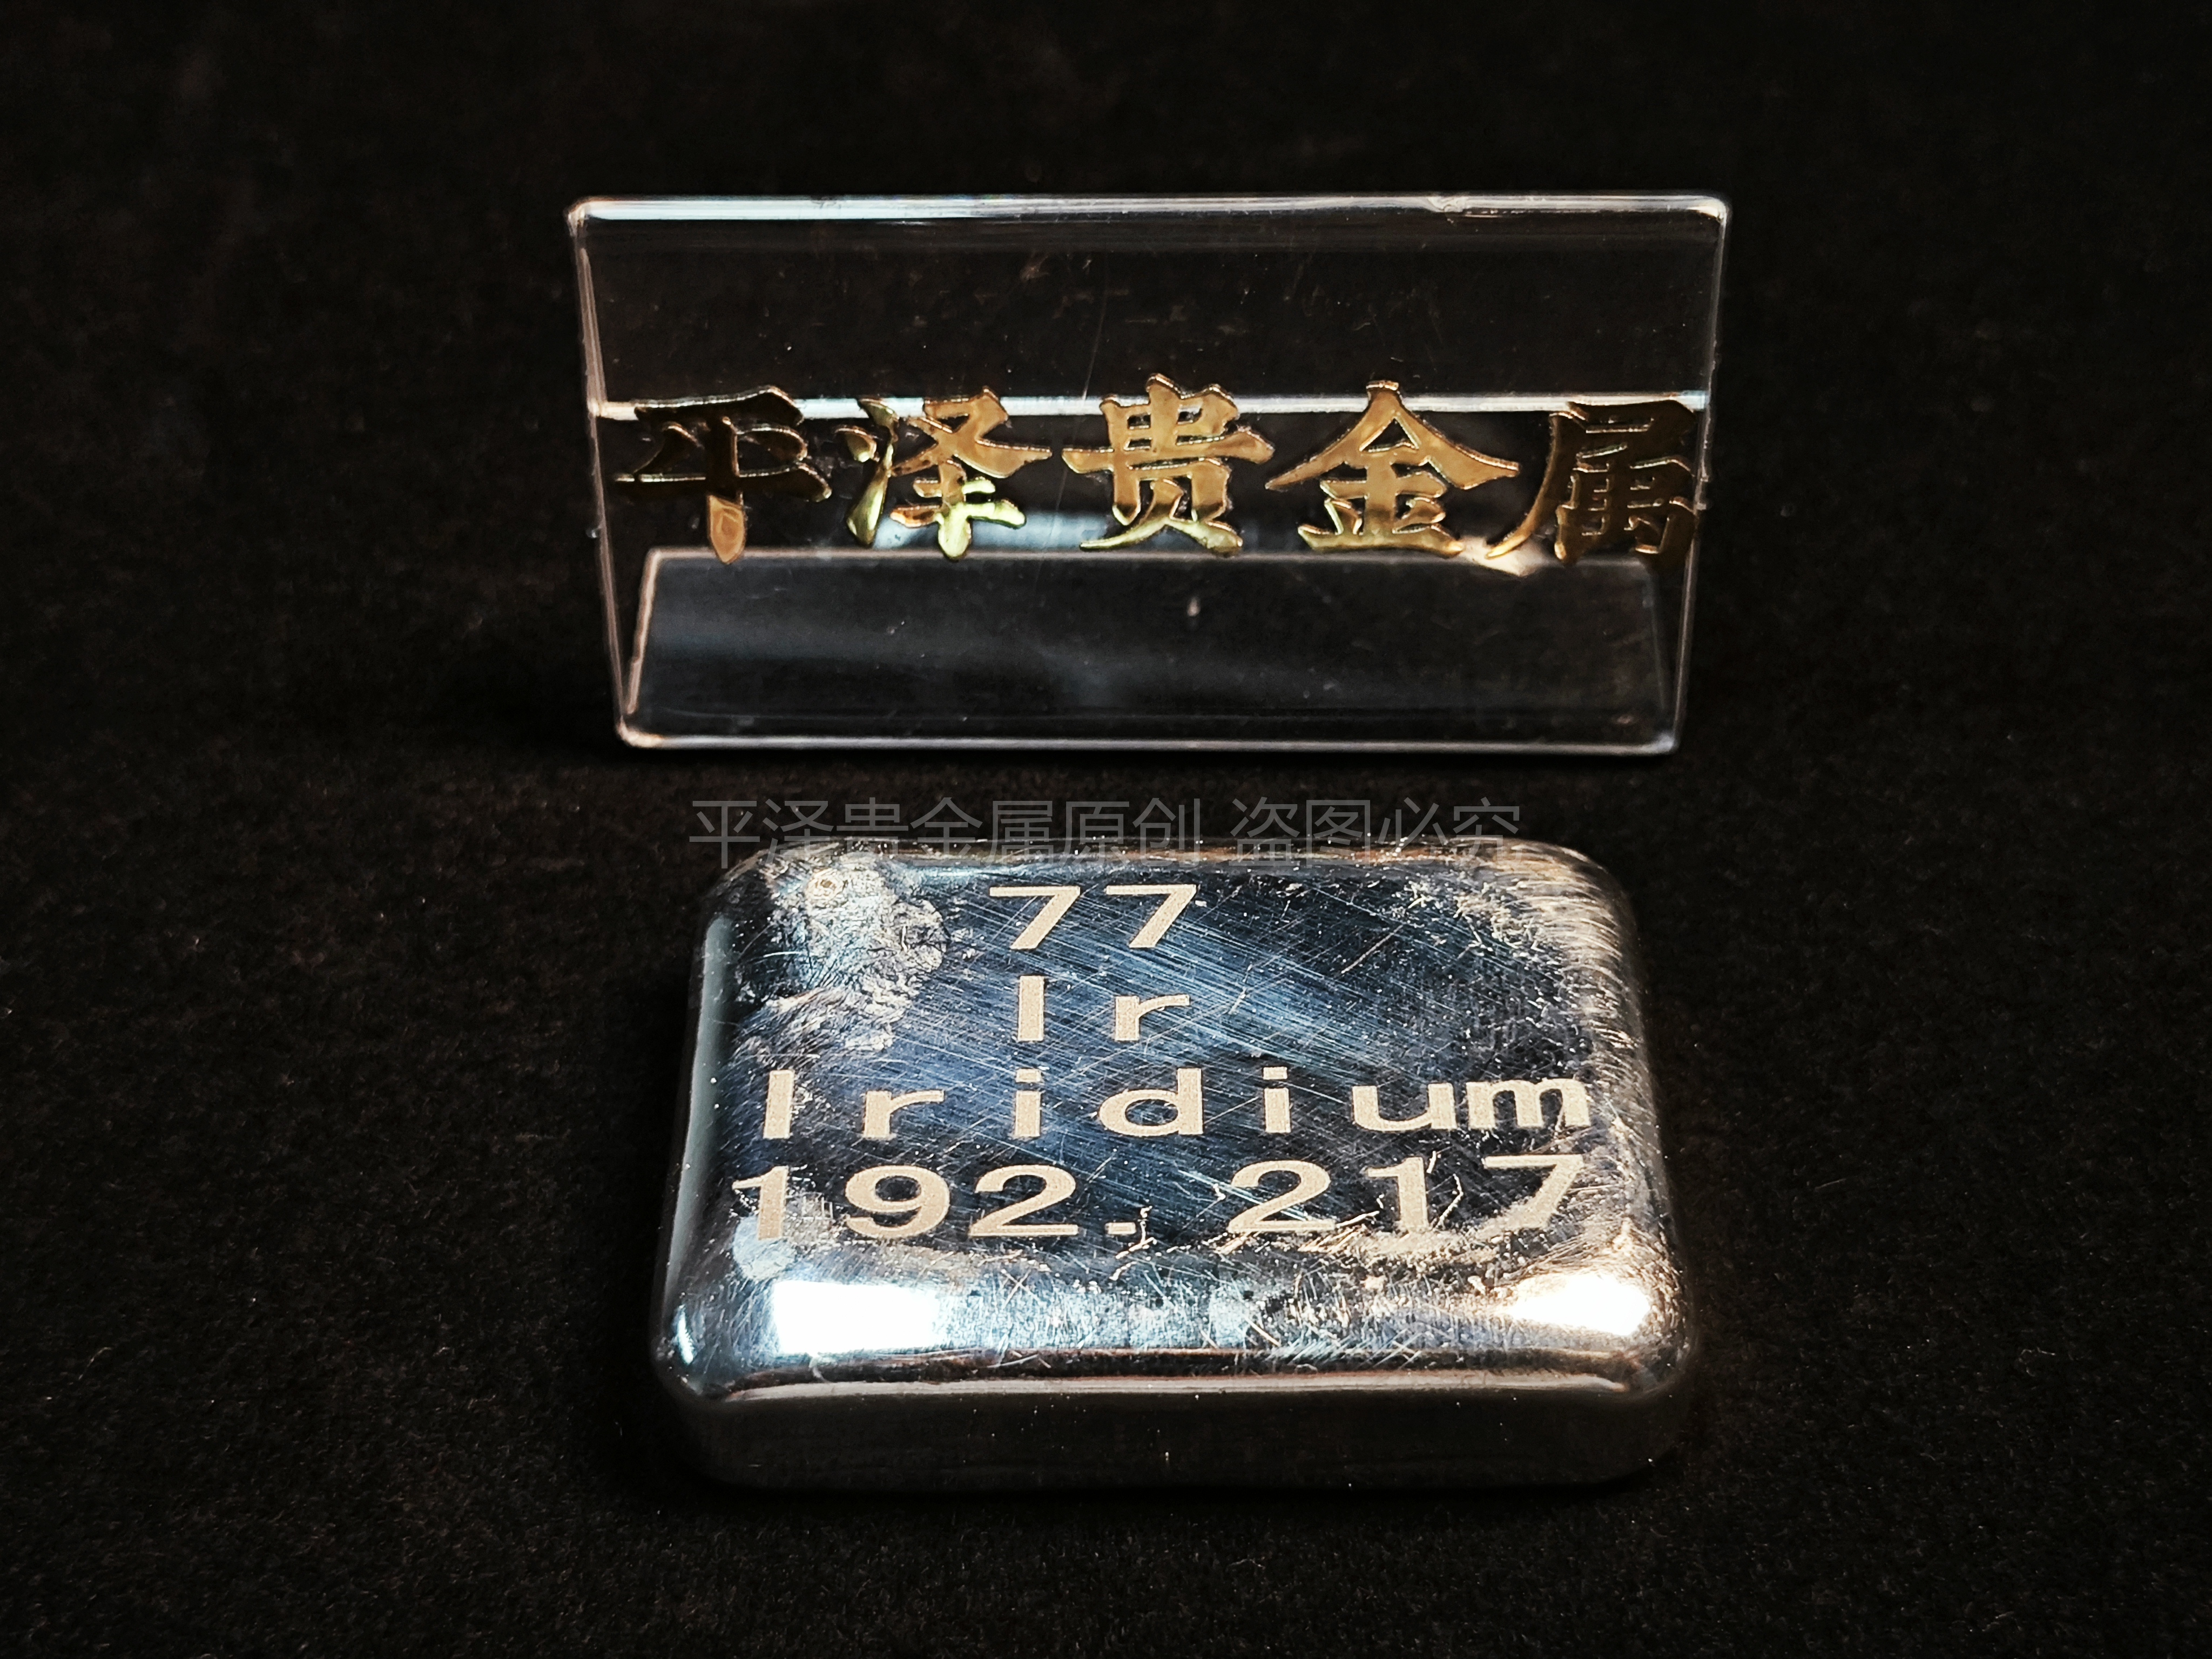 The value and recovery of iridium per ounce